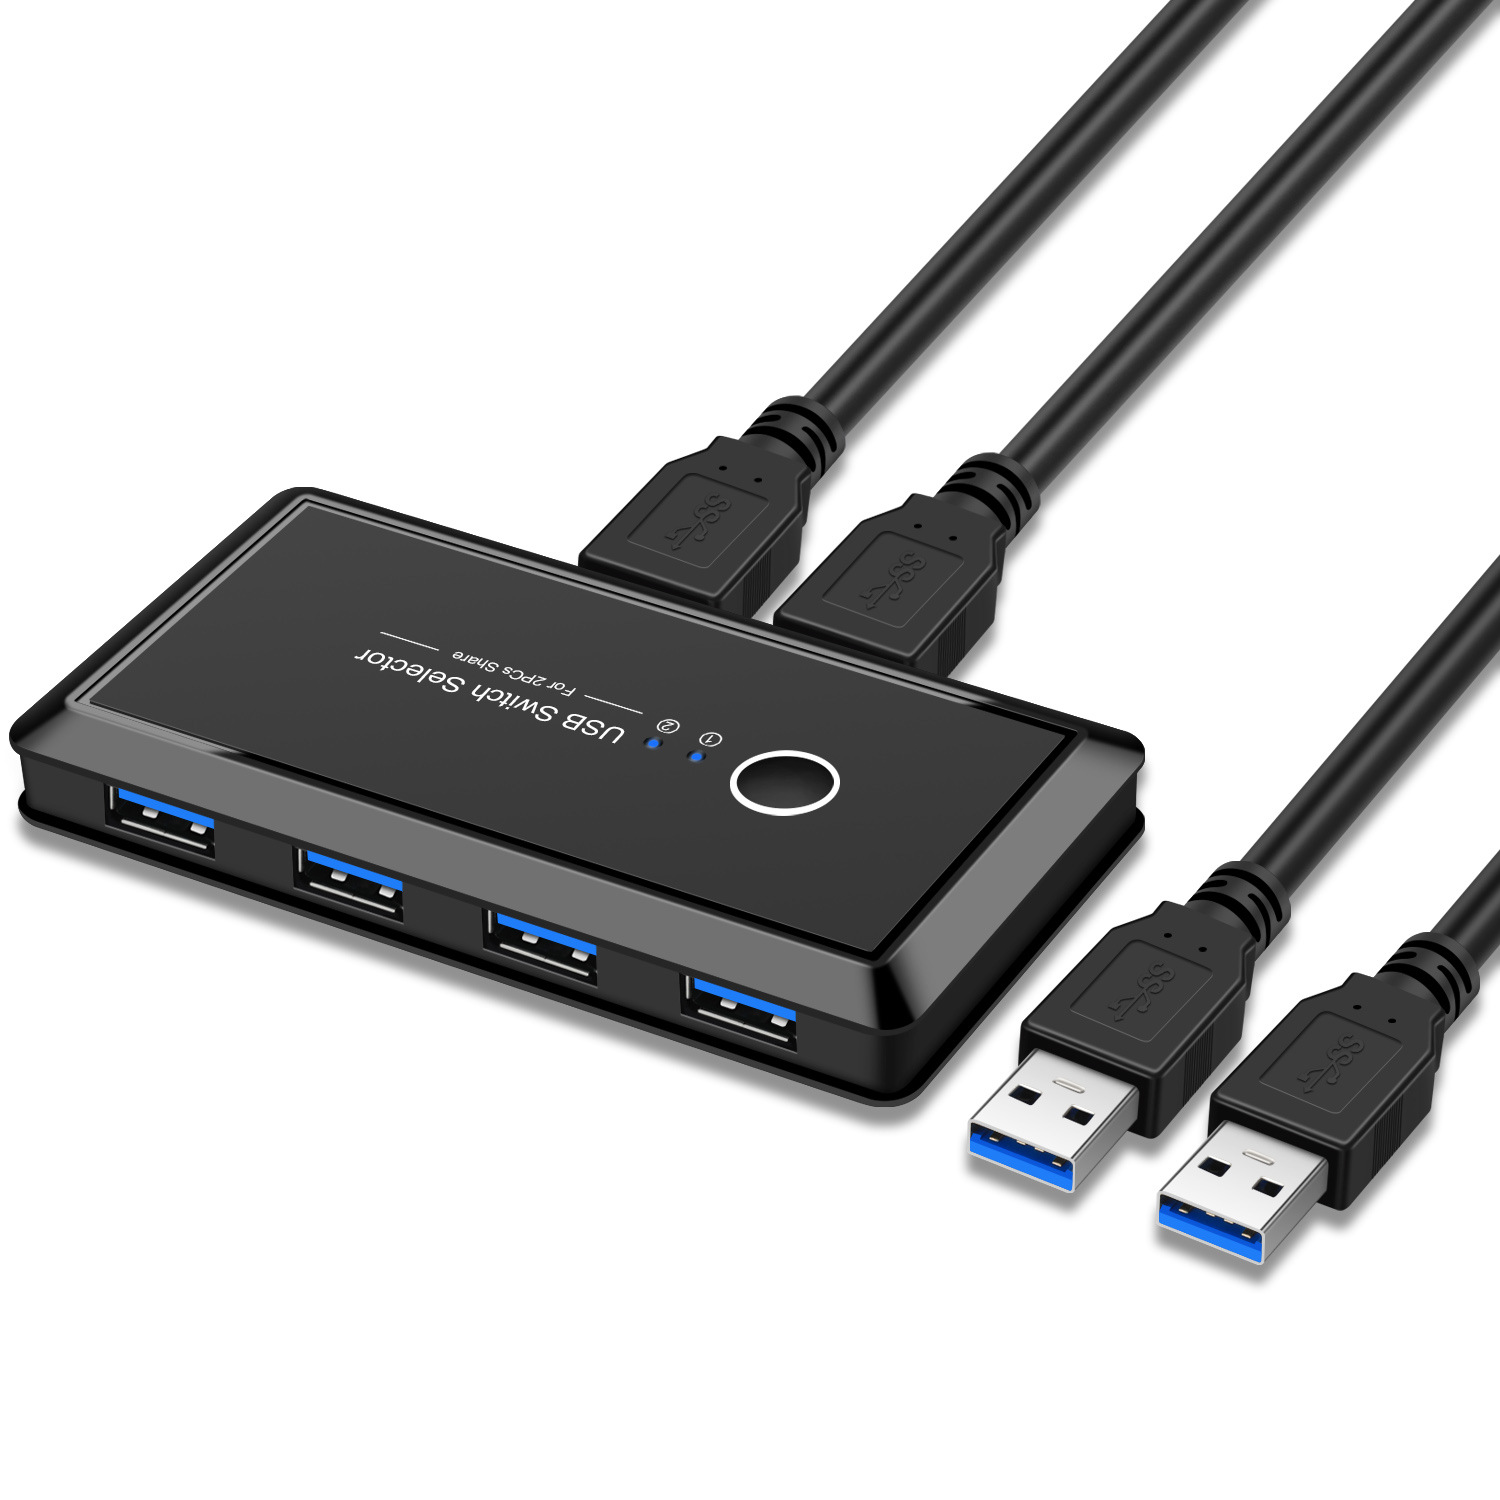 2 In 4 Out USB Switcher Computer Share Adapter Plug and Play USB Devices Printer Compatible for Windows Linux Mac OS